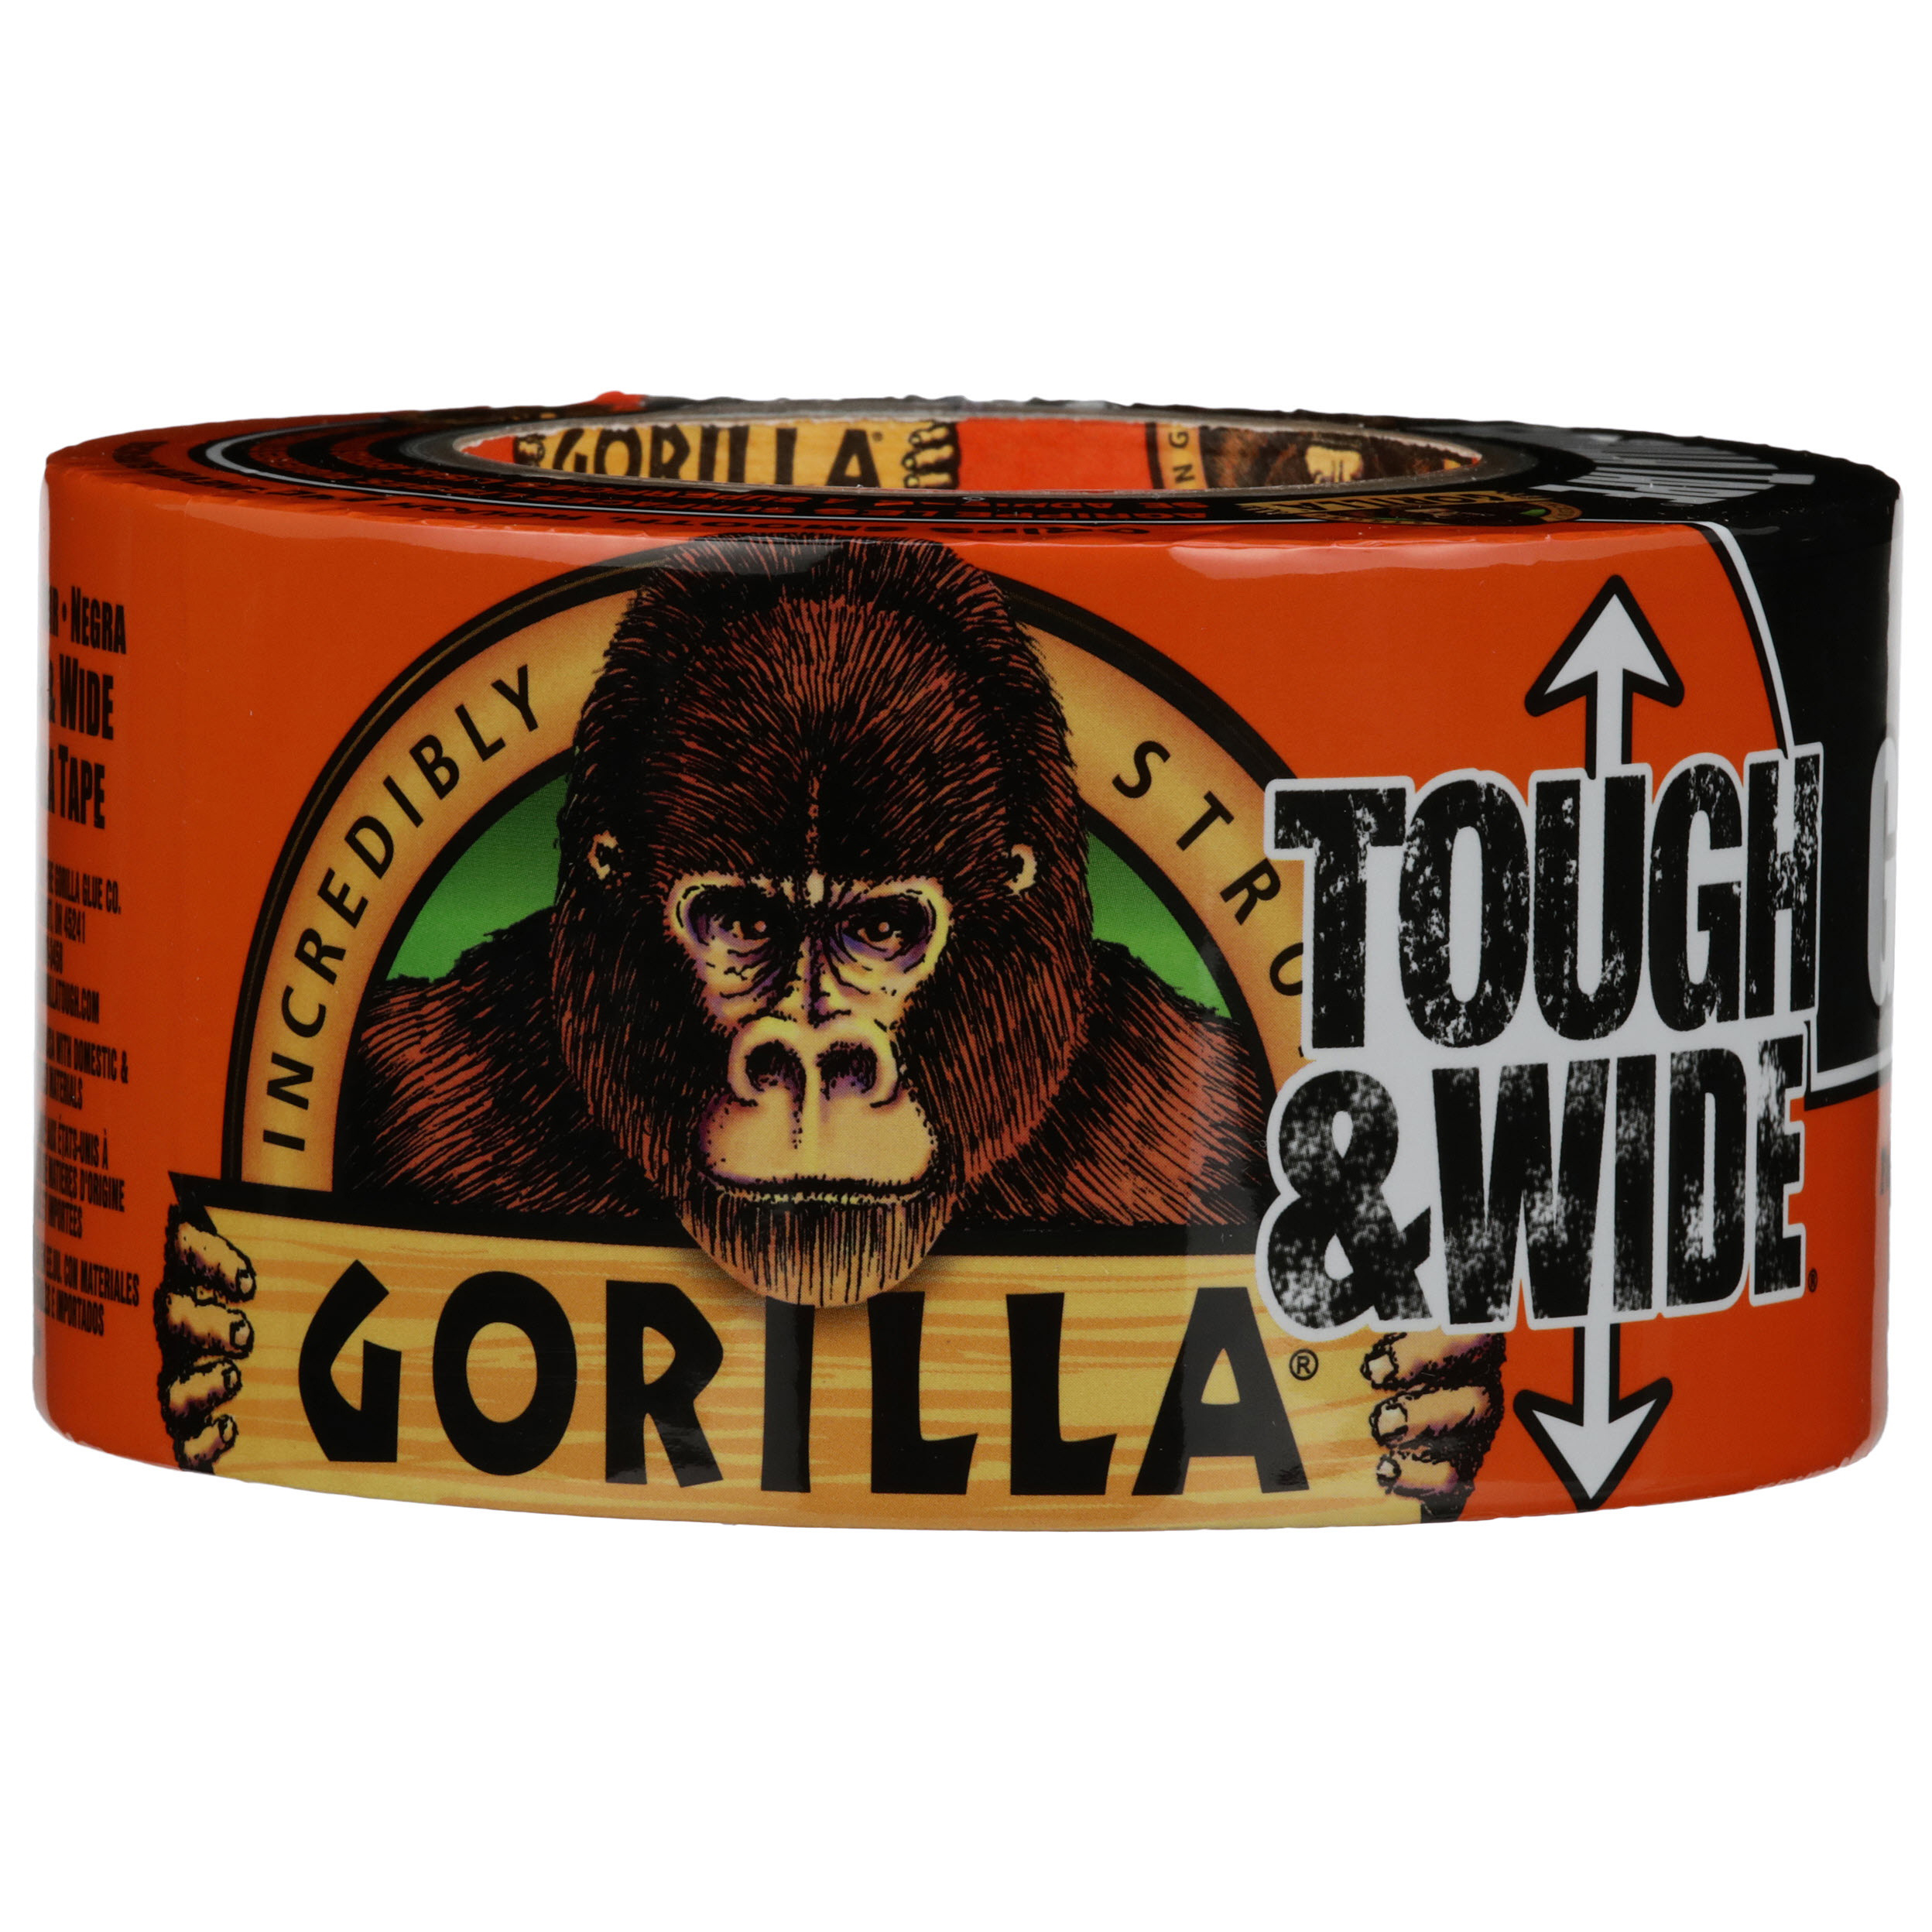 Gorilla 6003001 Duct Tape, 25 yd L, 3 in W, Cotton/Polymer Backing, Black - 1